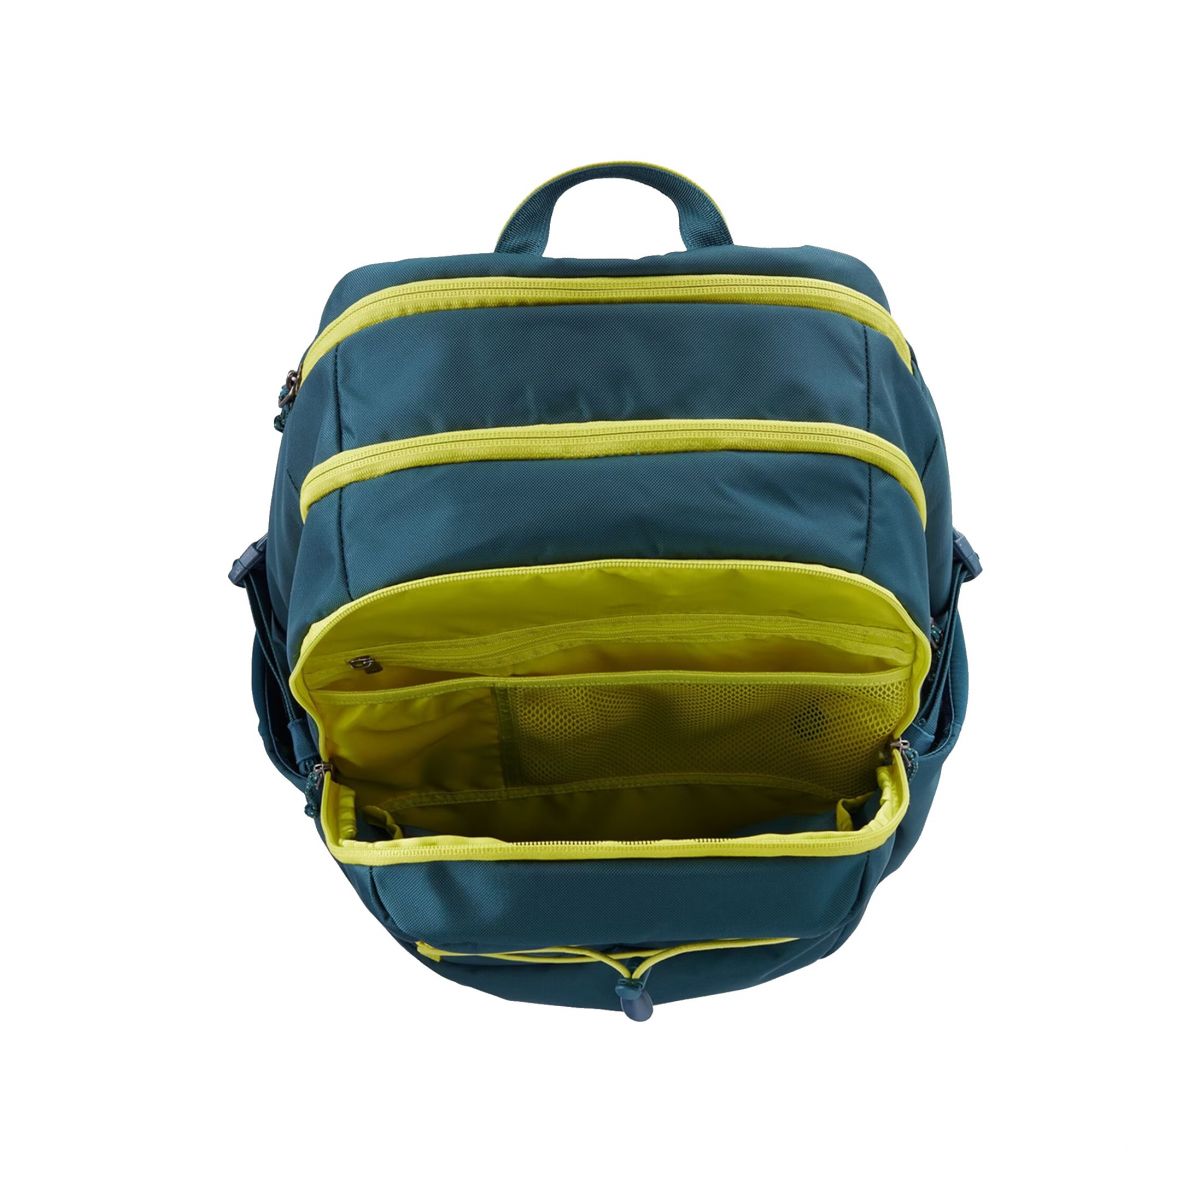 Patagonia Chacabuco Pack 30